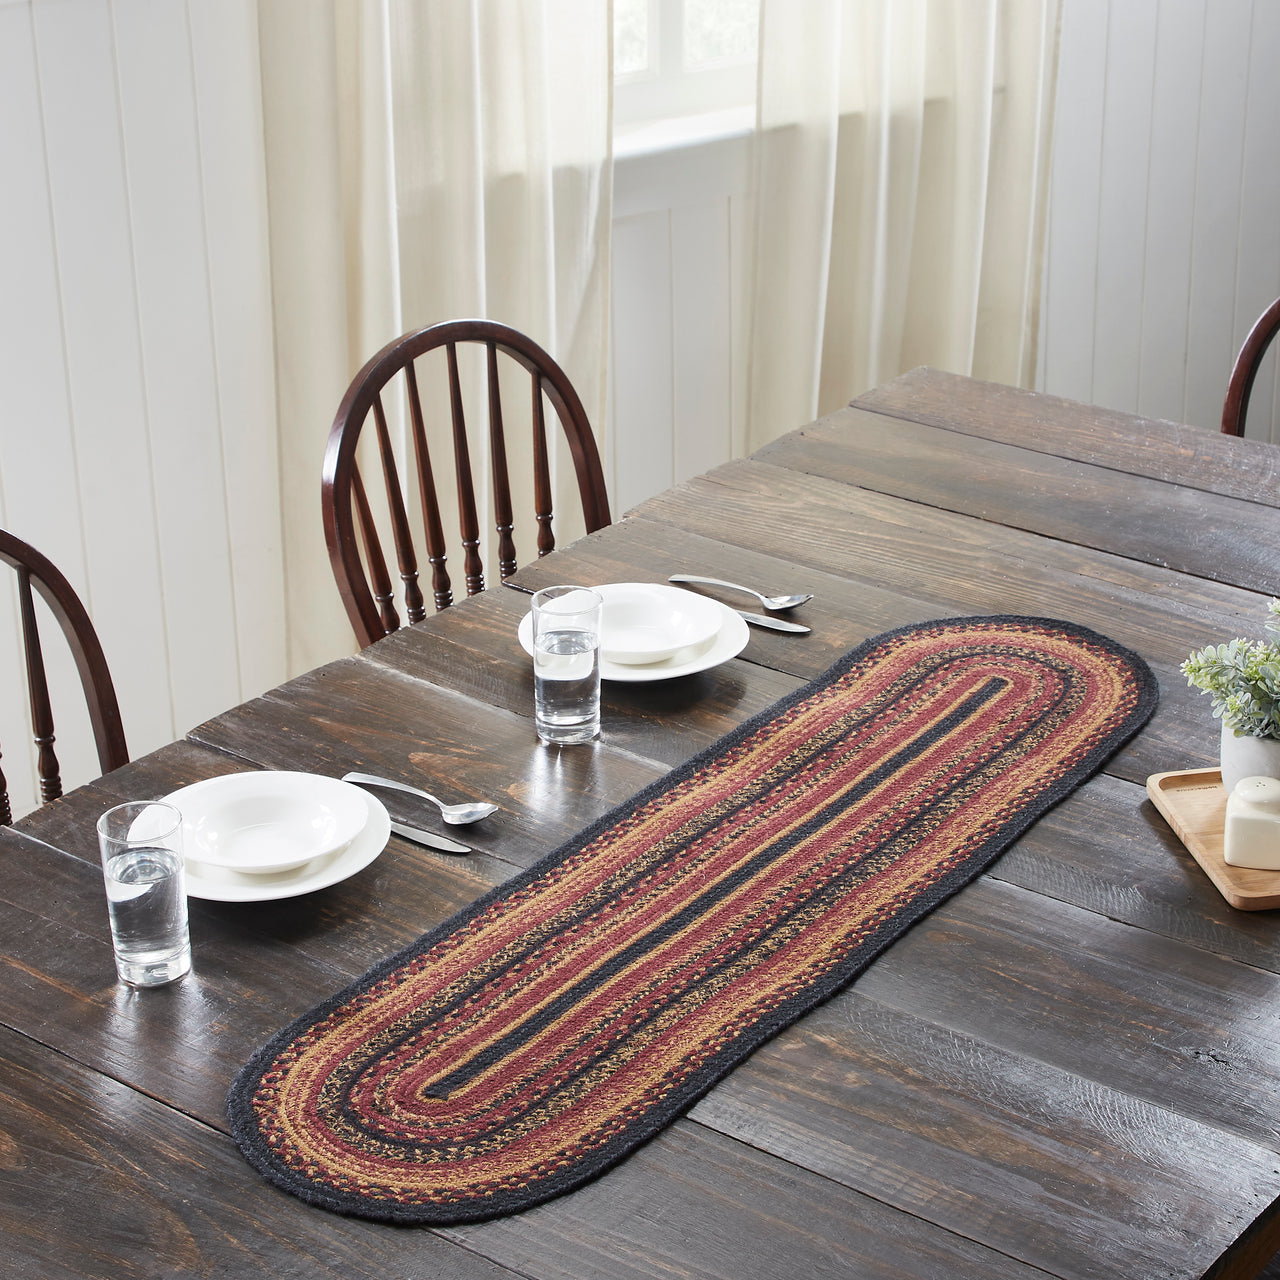 Heritage Farms Jute Oval Runner 13x48 VHC Brands